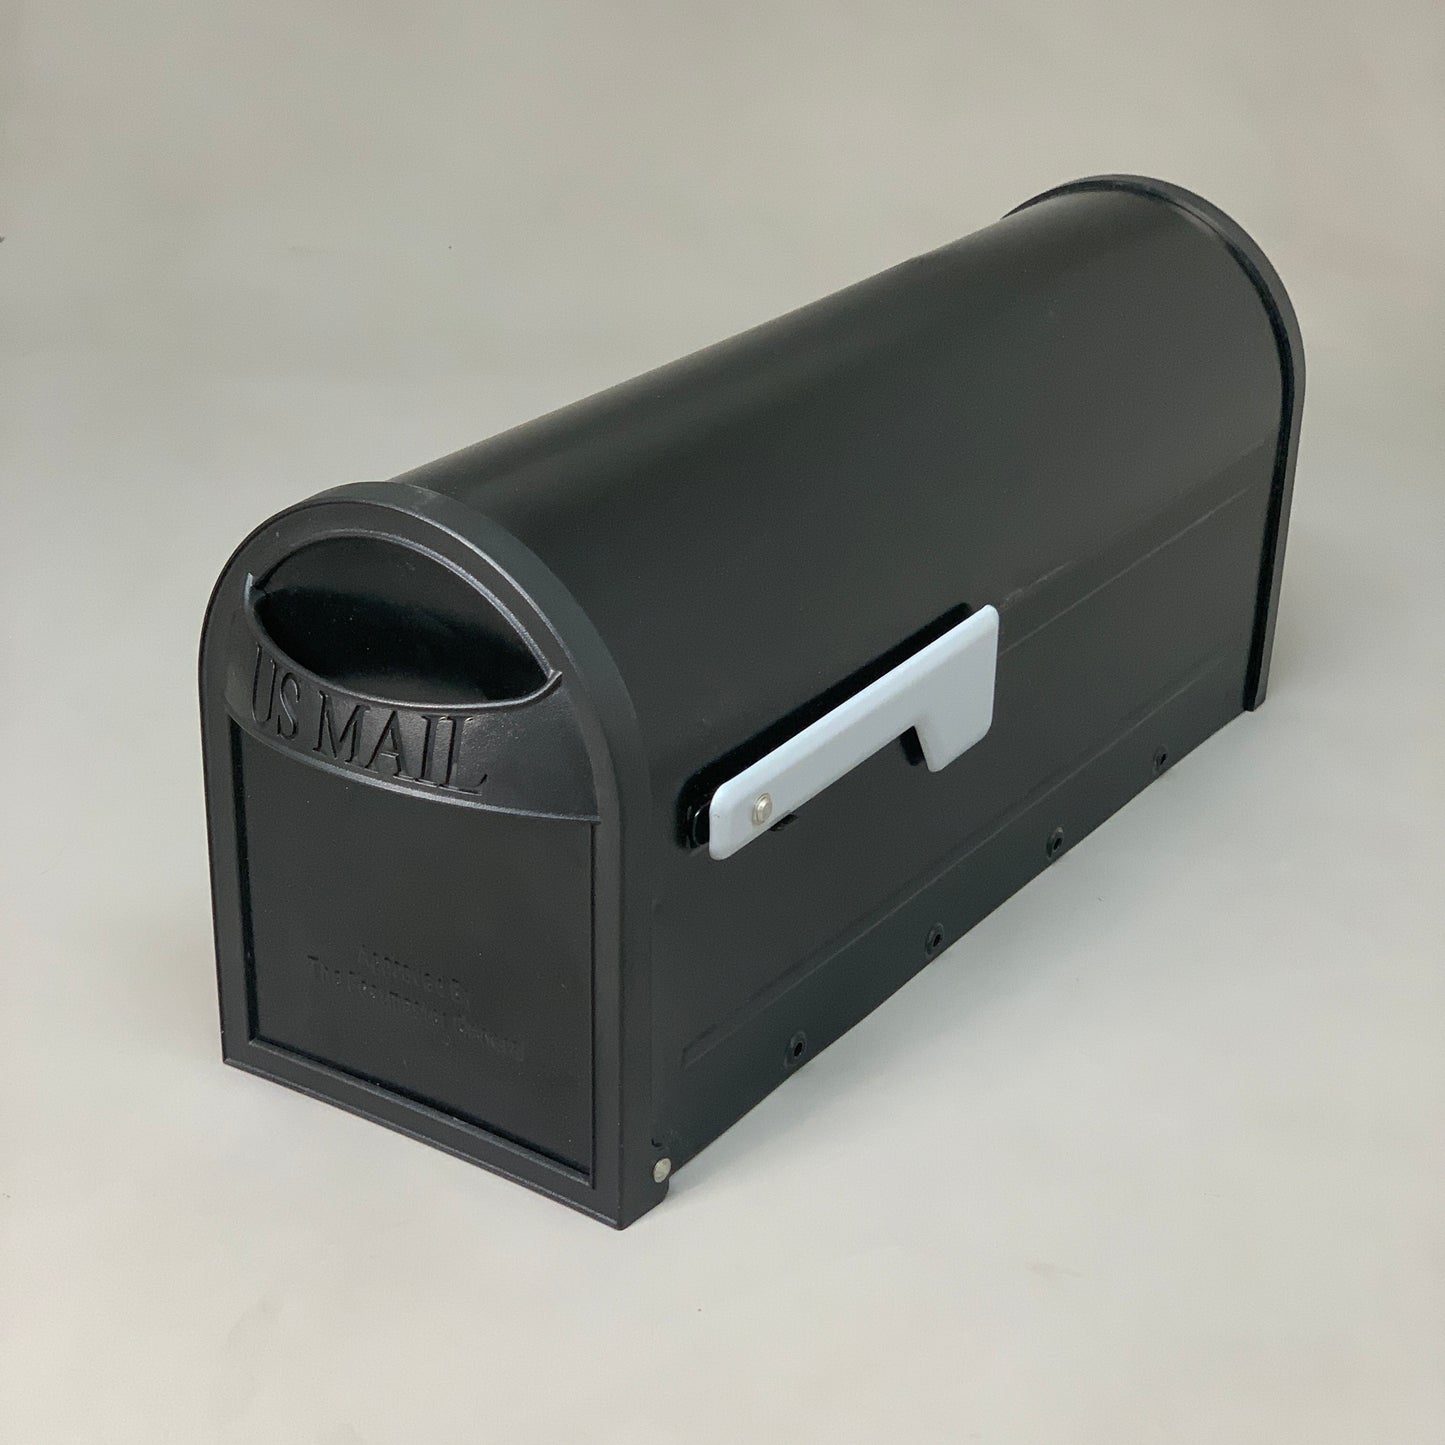 ARCHITECTUAL MAILBOXES Carlisle Black Post Mount Mailbox 6.6" x 8.8" x 20.8"Damaged (New Other)